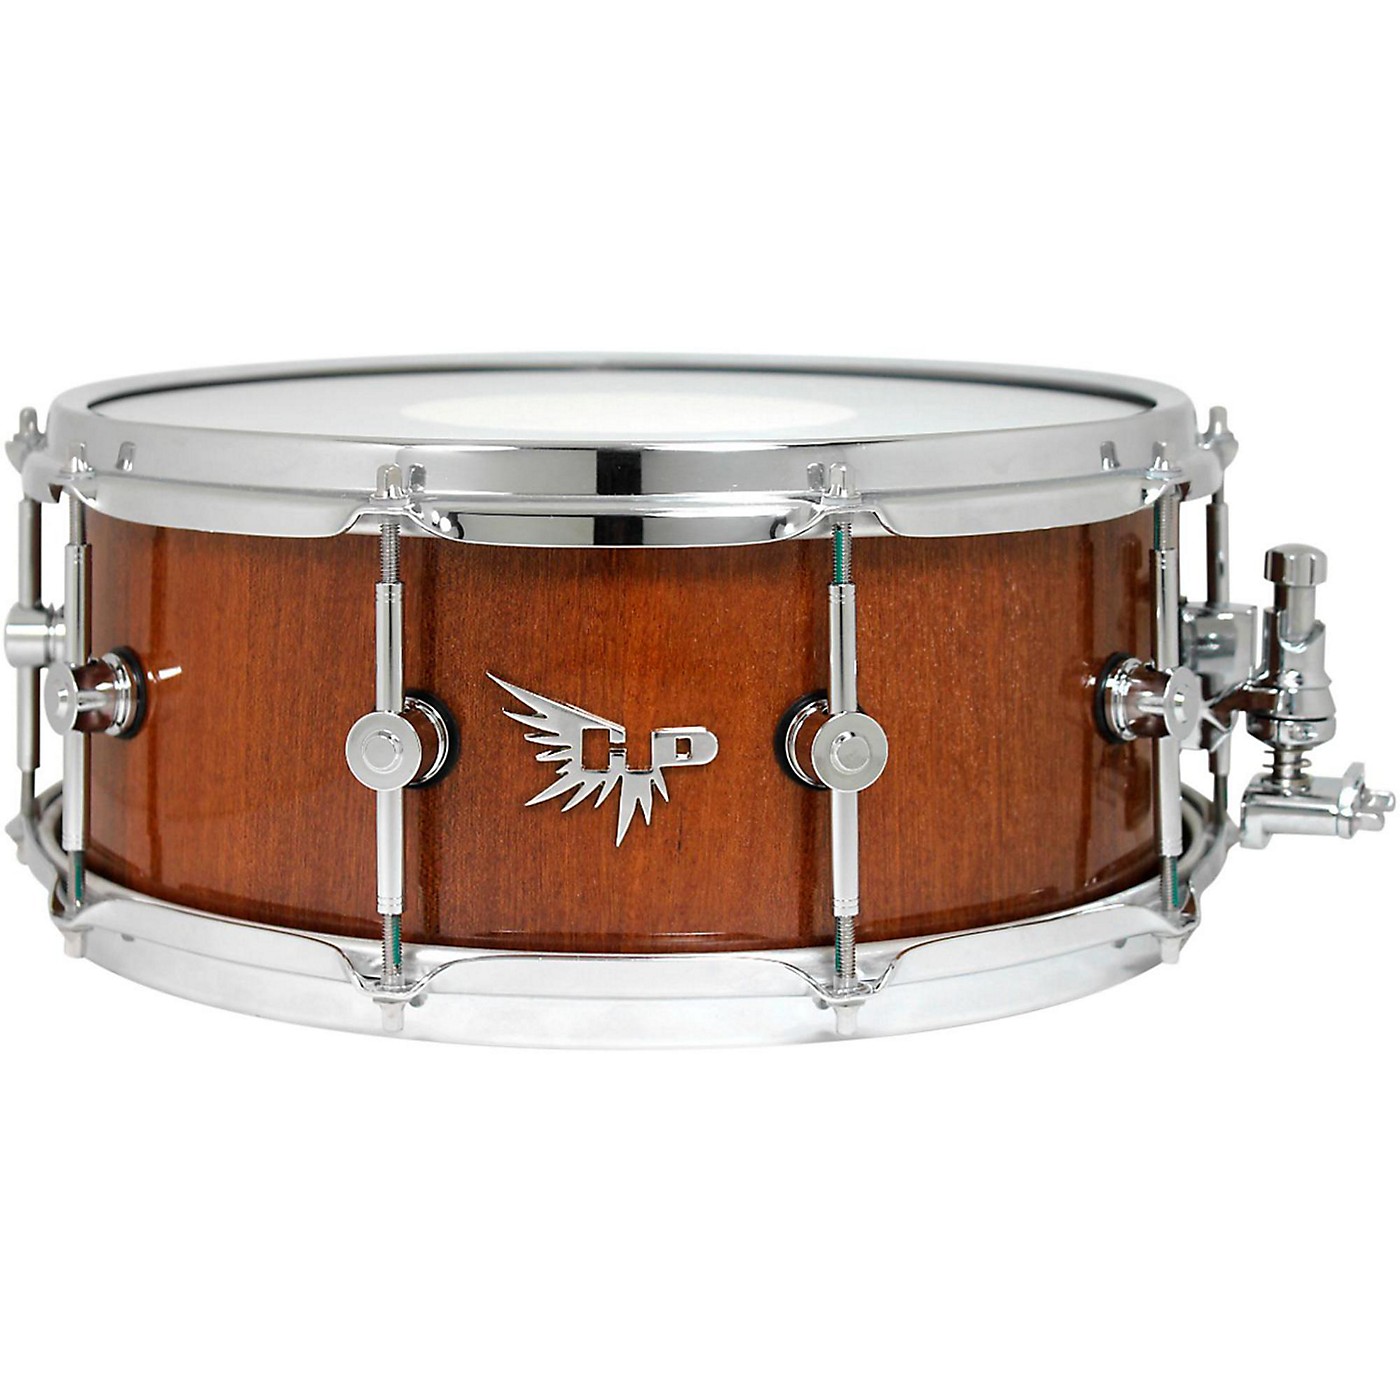 Hendrix Drums Archetype Series African Sapele Stave Snare Drum thumbnail